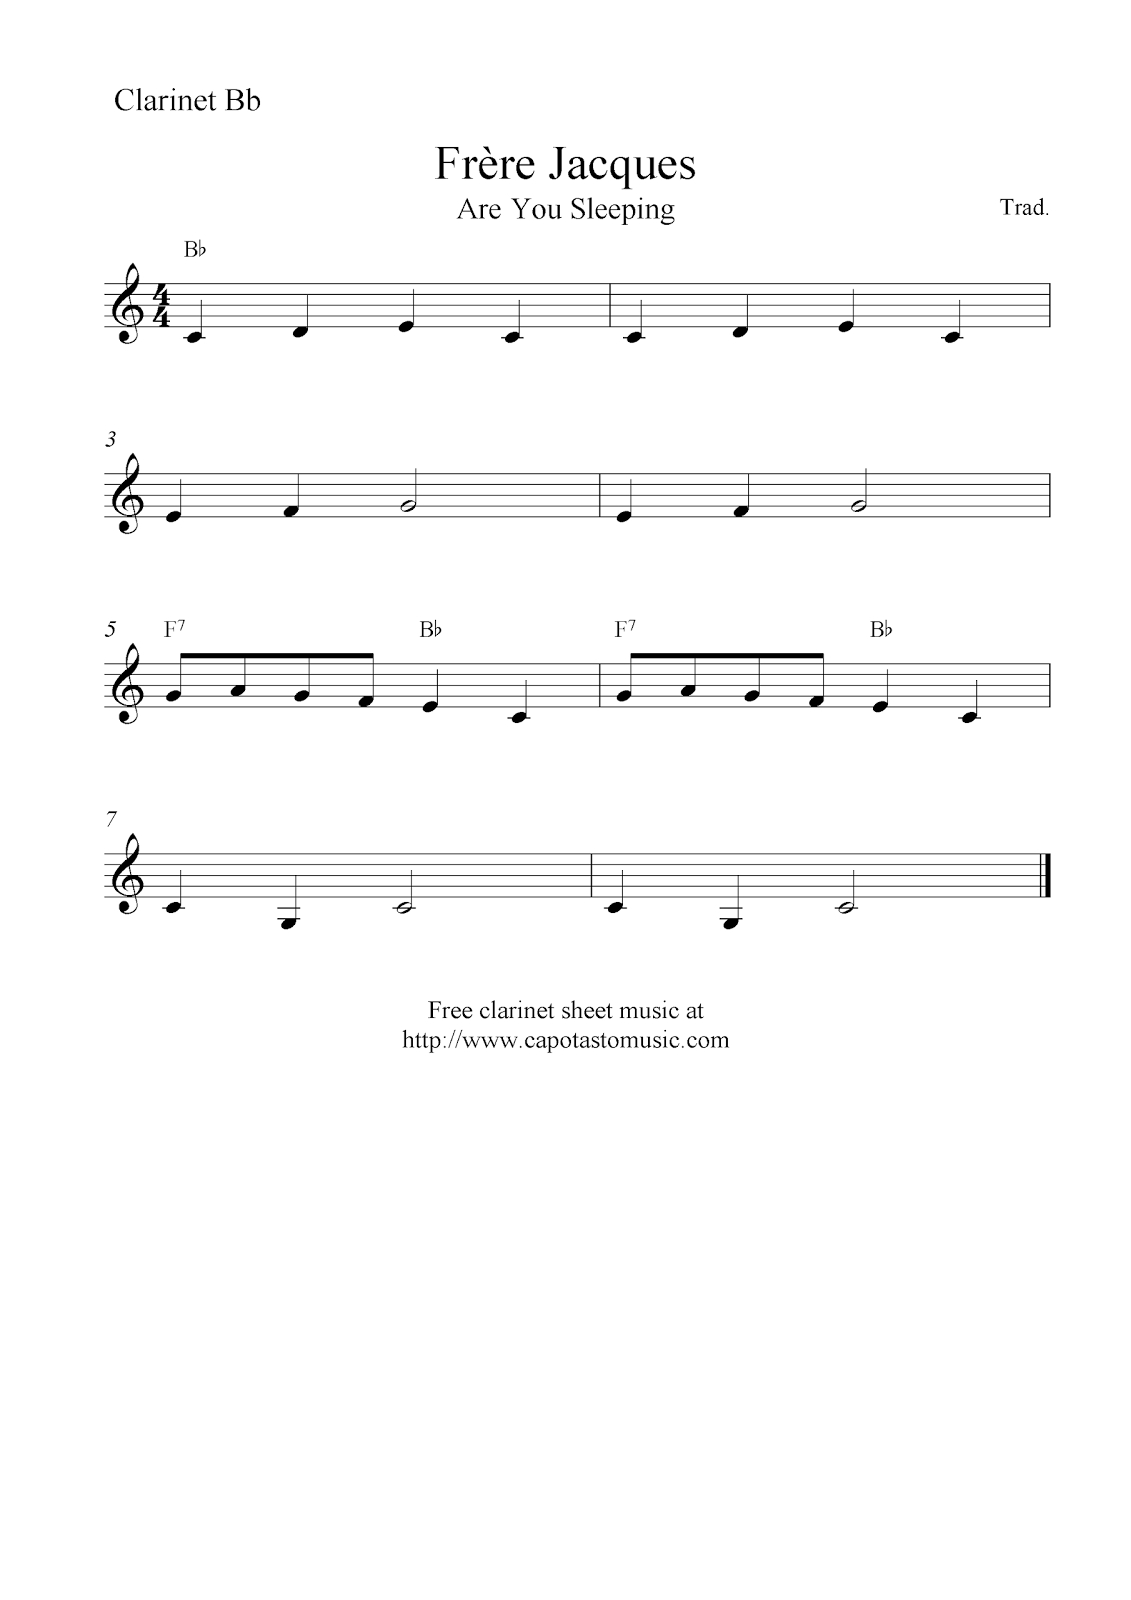 Frère Jacques (Are You Sleeping), Free Easy Clarinet Sheet Music Notes - Free Sheet Music For Clarinet Printable